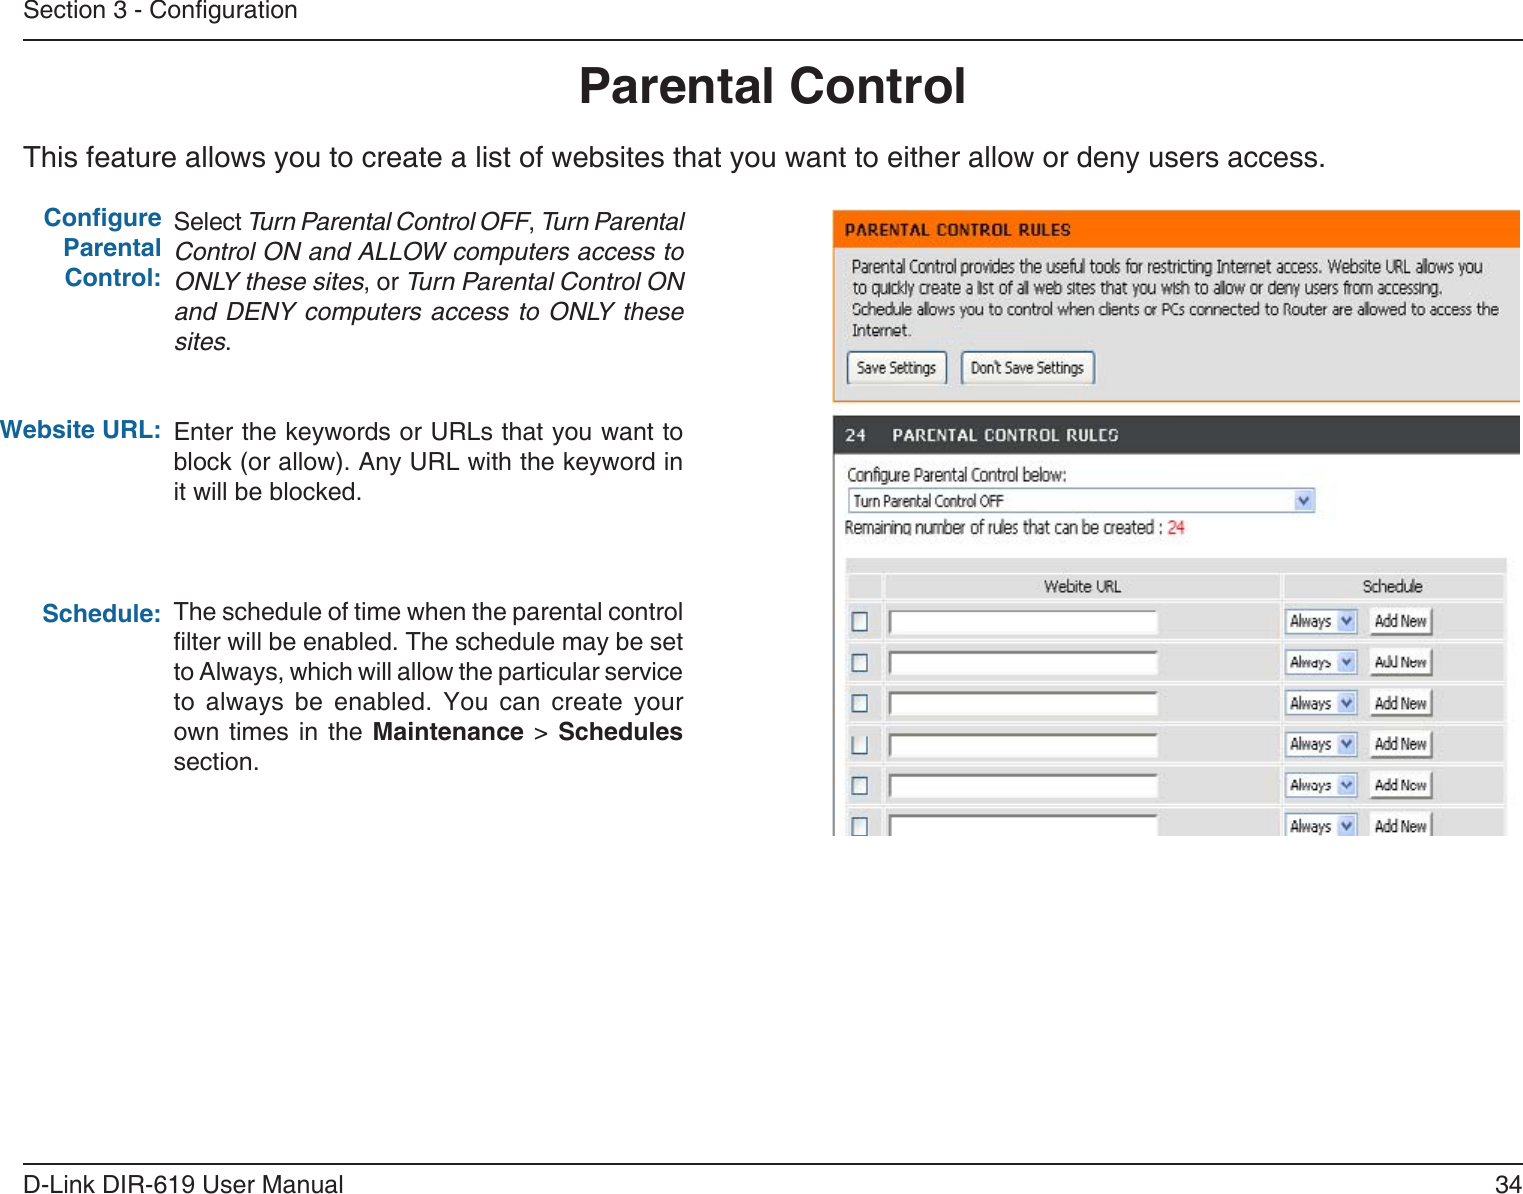 34D-Link DIR-619 User ManualSection 3 - CongurationThis feature allows you to create a list of websites that you want to either allow or deny users access.Parental ControlSelect Turn Parental Control OFF, Turn ParentalControl ON and ALLOW computers access toONLY these sites, or Turn Parental Control ONand DENY computers  access to ONLY thesesites.Enter the keywords or URLs that you want toblock (or allow). Any URL with the keyword init will be blocked.The schedule of time when the parental controllter will be enabled. The schedule may be set to Always, which will allow the particular service to  always  be  enabled.  You  can  create  yourown times in the Maintenance &gt; Schedules section.Congure Parental Control:Website URL:Schedule: